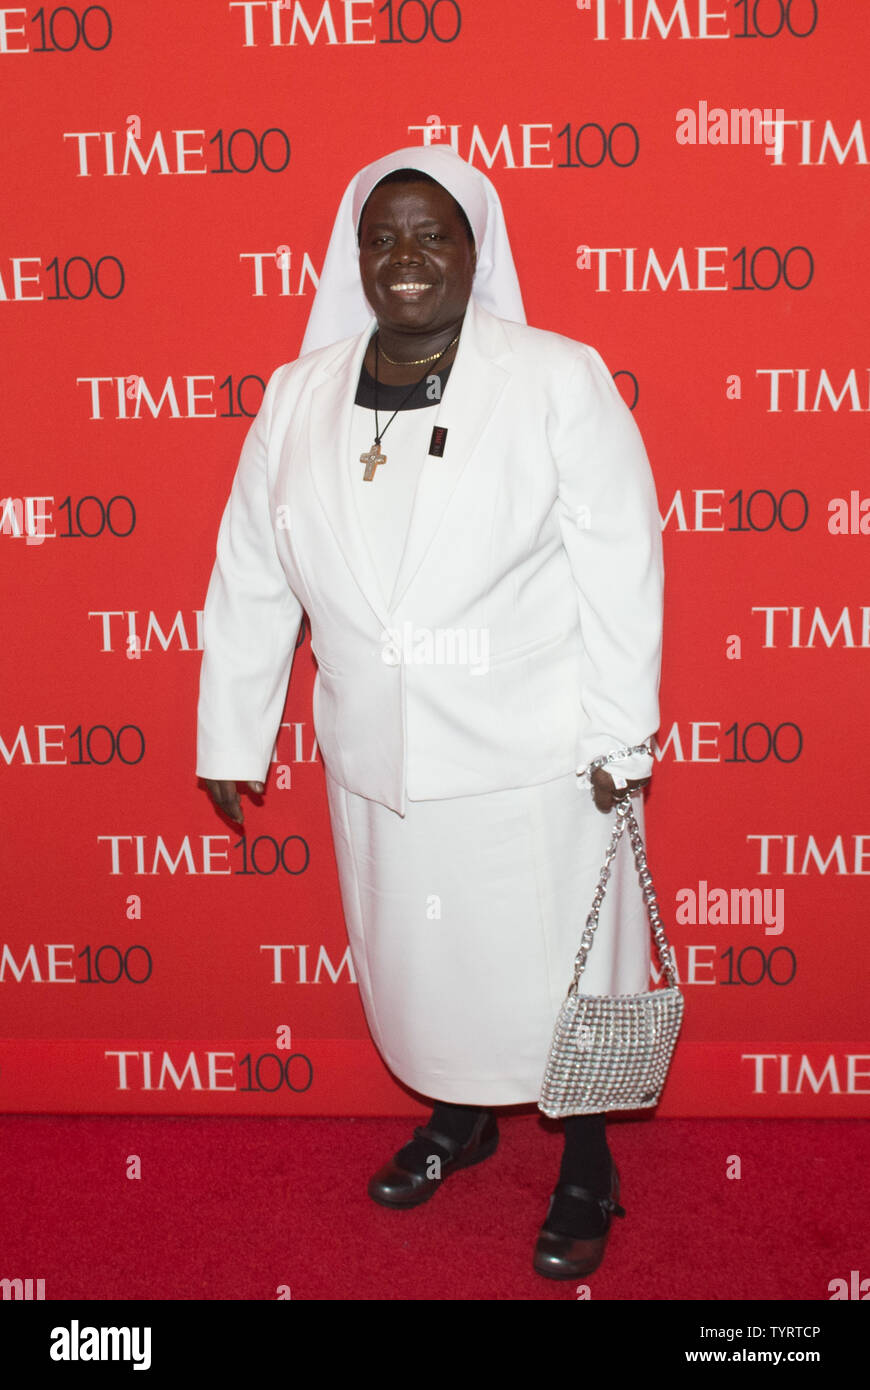 Lindsey Vonn arrives on the red carpet at the TIME 100 Gala at Frederick P. Rose Hall, Home of Jazz at Lincoln Center, in New York City on April 26, 2017. TIME 100 celebrates TIME Magazine's list of the 100 Most Influential People in the World.      Photo by Bryan R. Smith/UPI Stock Photo